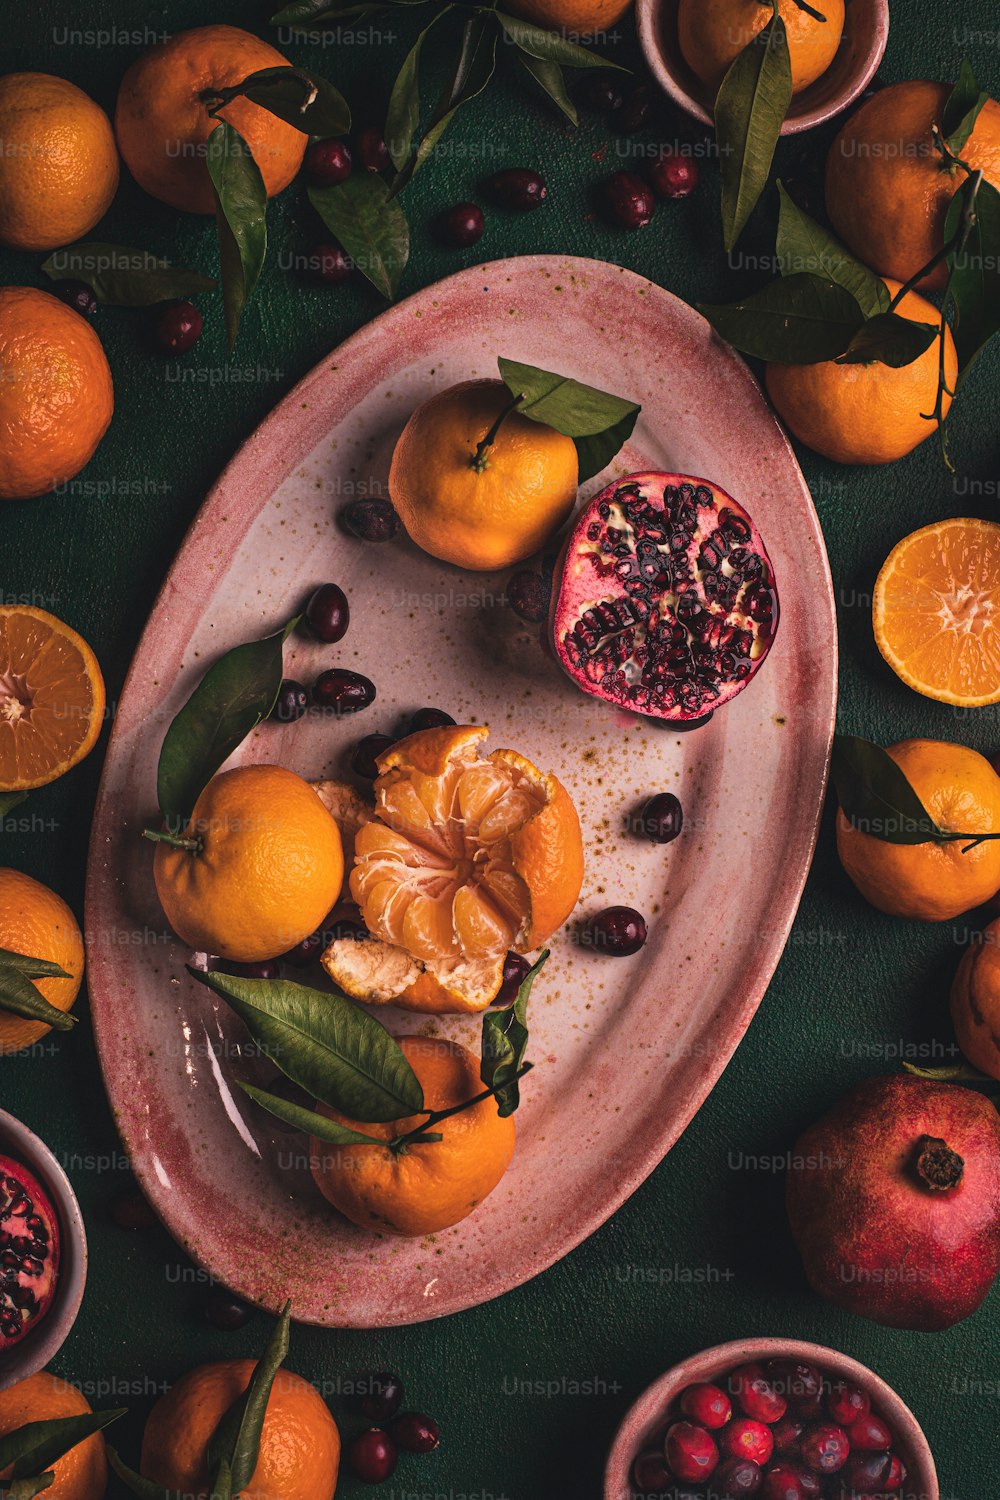 a plate of oranges and pomegranates on a table